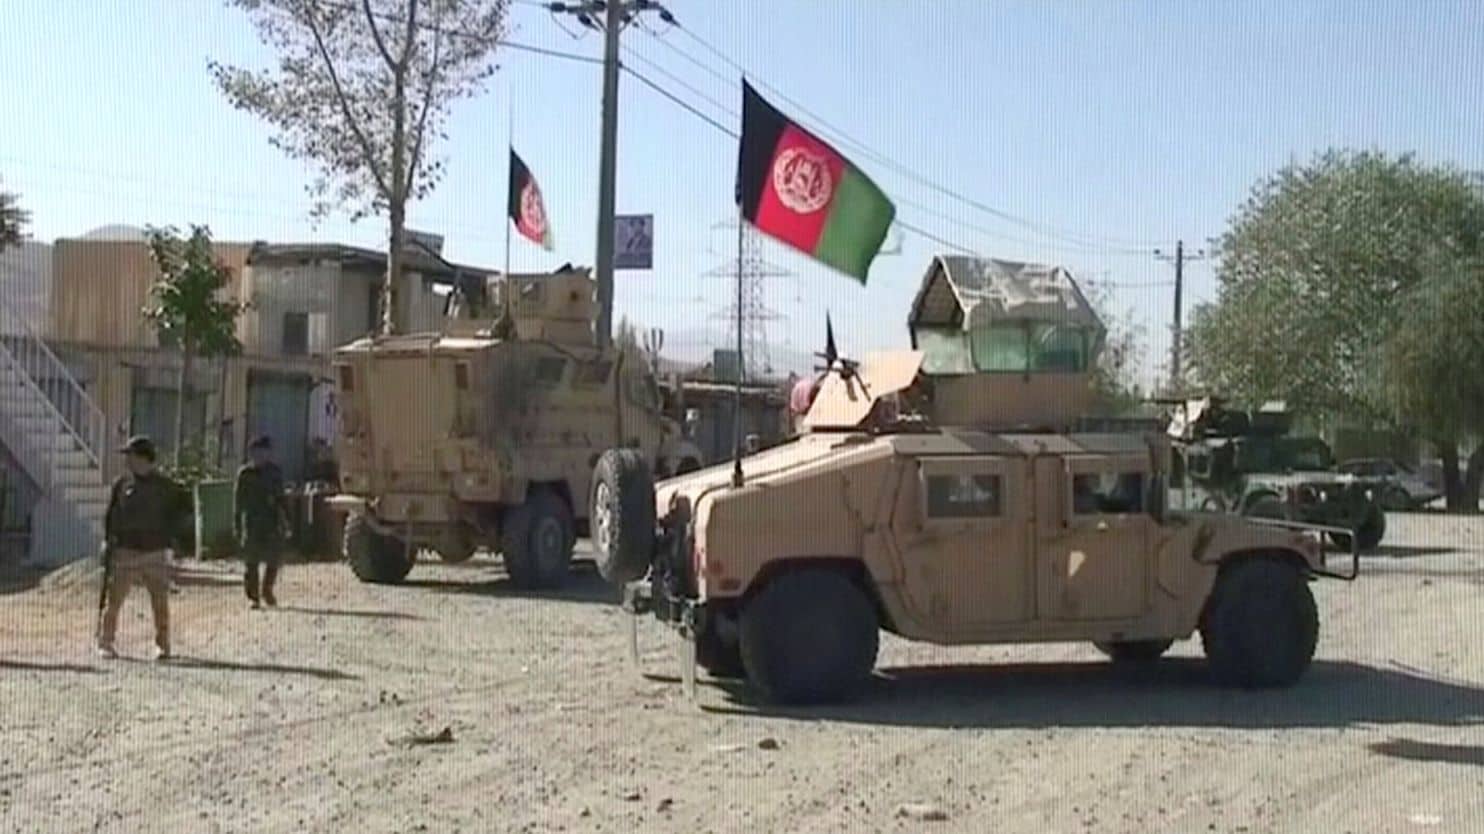 Afghan forces use artillery to repel multiple Taliban assaults that kill at least 21